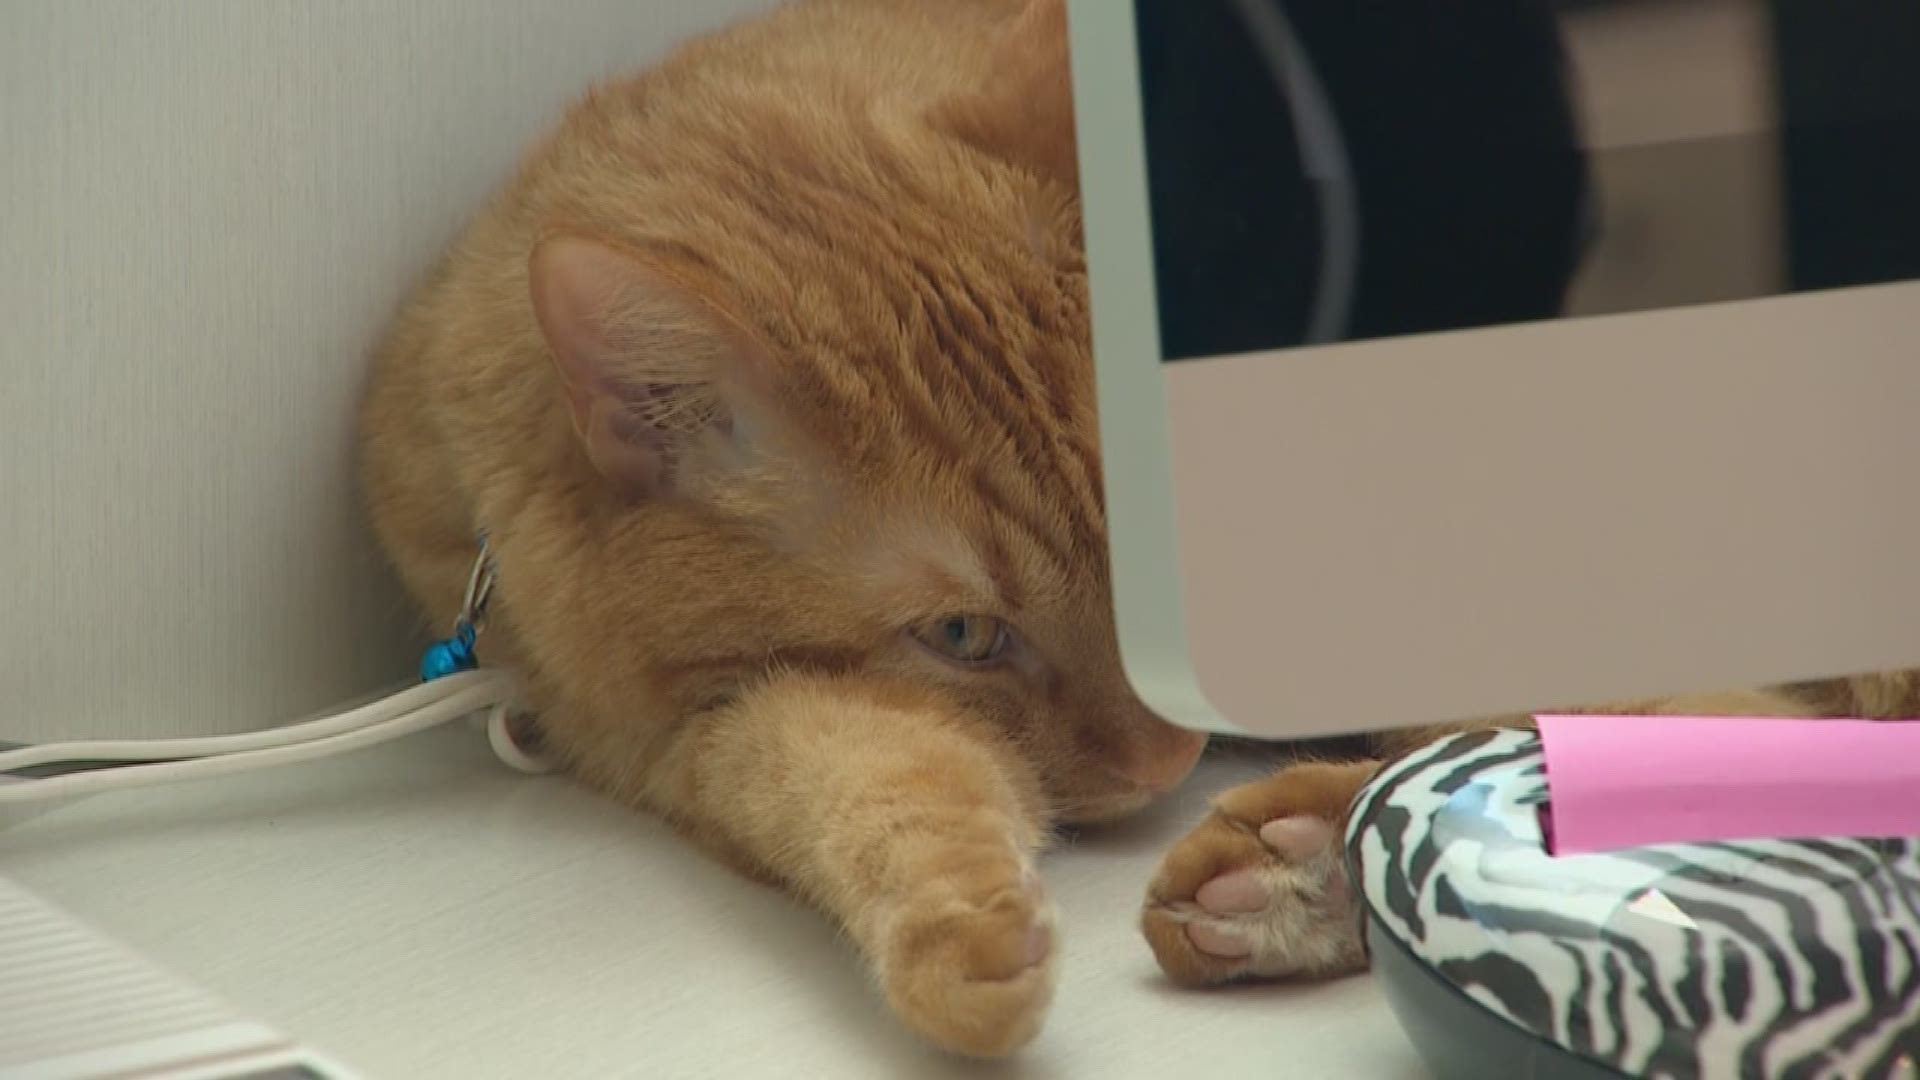 Colorado cat missing for 10 months rescued from hole more than 790 miles away in Dallas